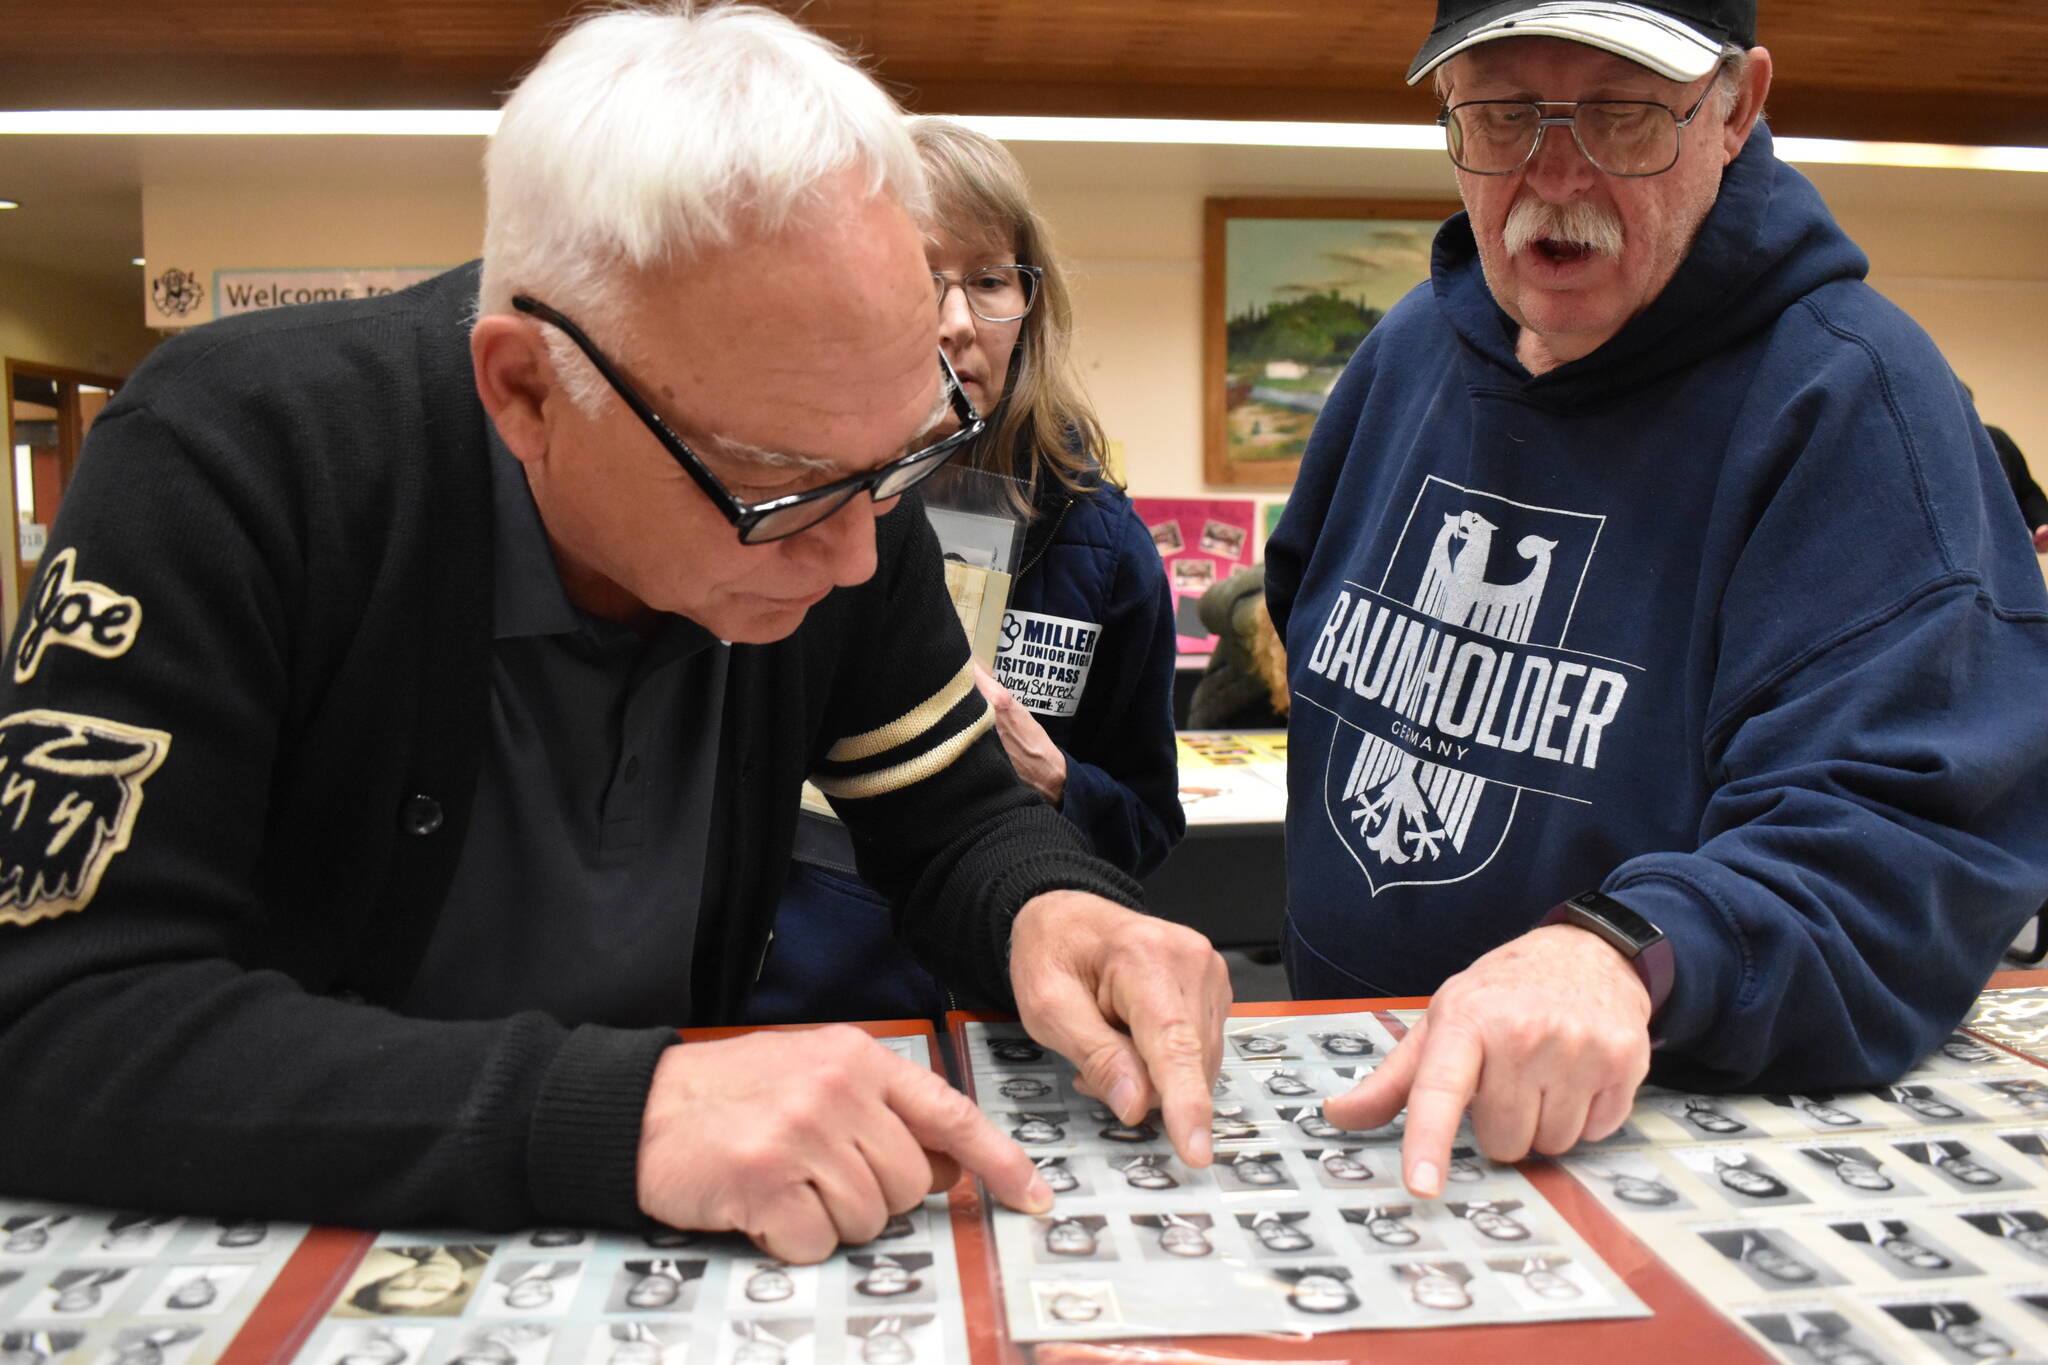 Clayton Franke / The Daily World
Former Miller Jr. High School students Joe Chicano, left and Mike Van Blaricom peruse old yearbook photos, identifying old teachers.